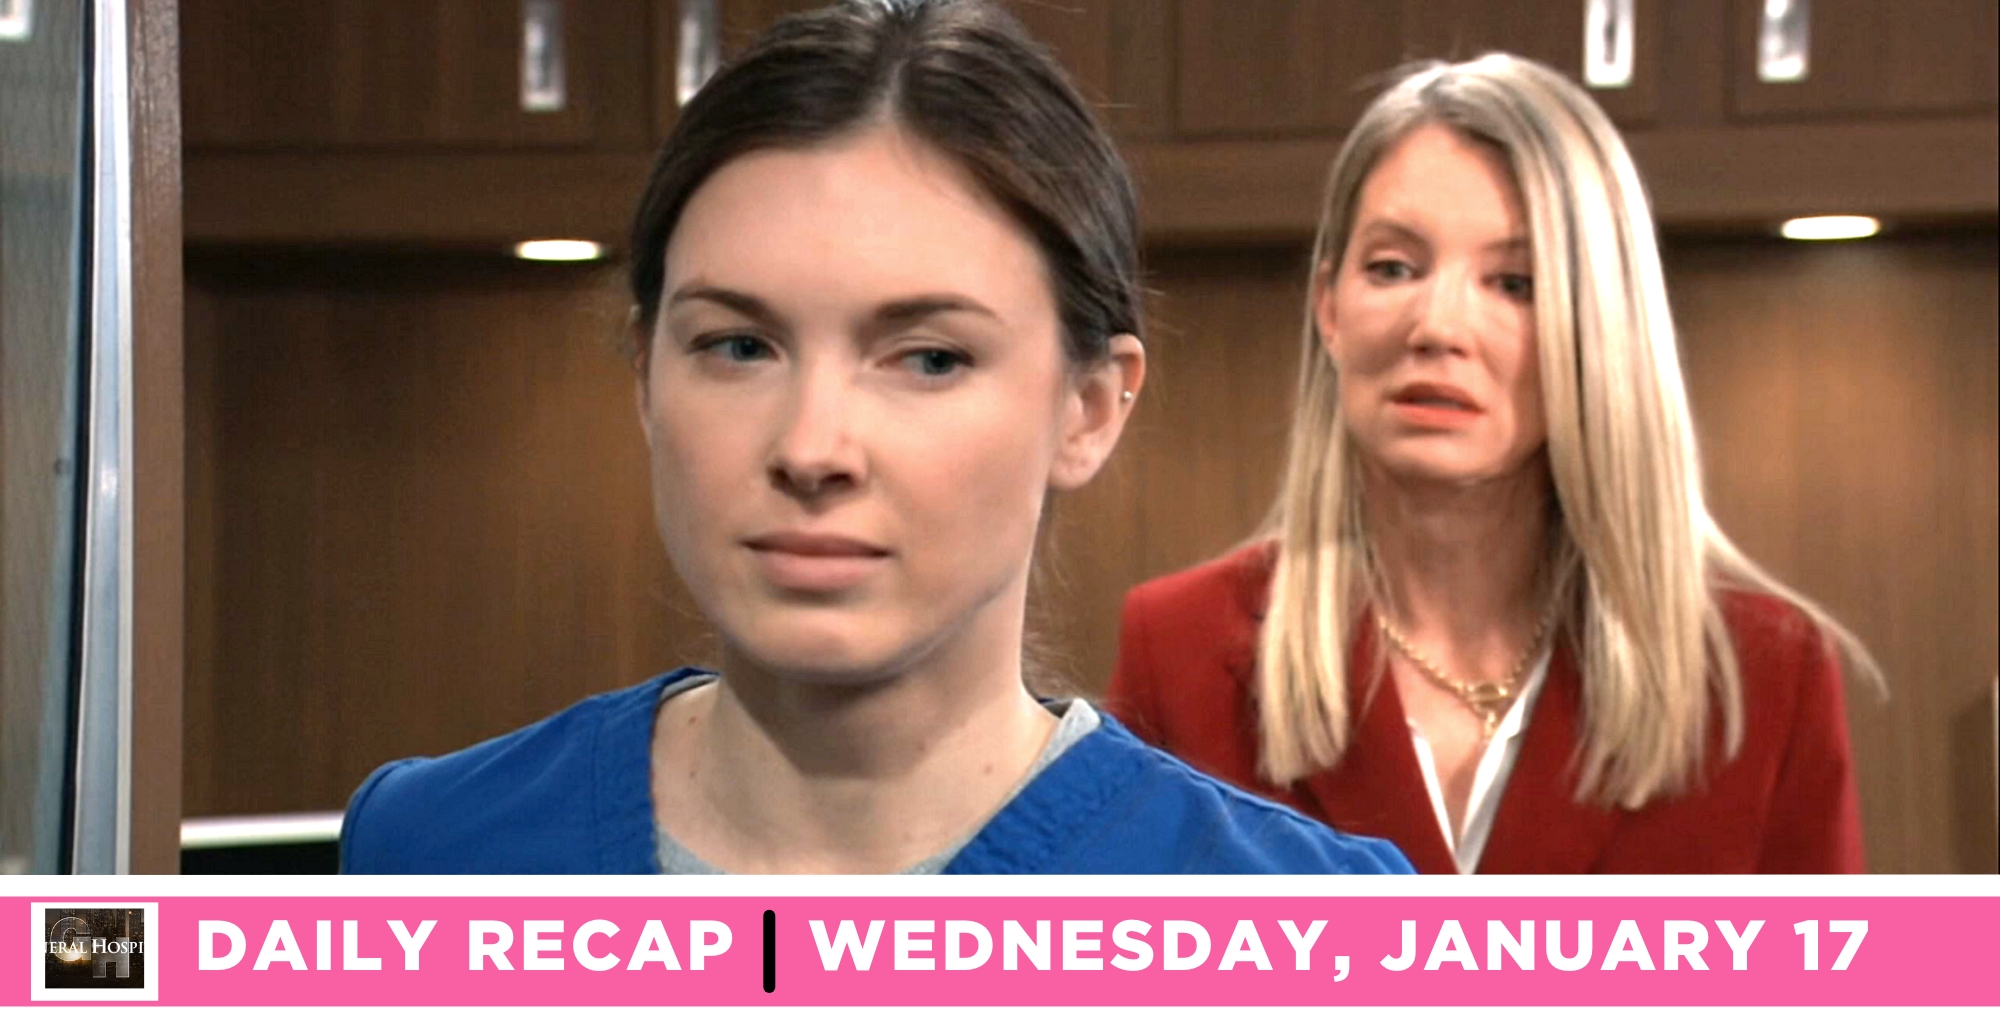 willow corinthos and nina reeves corinthos had it out on general hospital recap for wednesday, january 17, 2023.